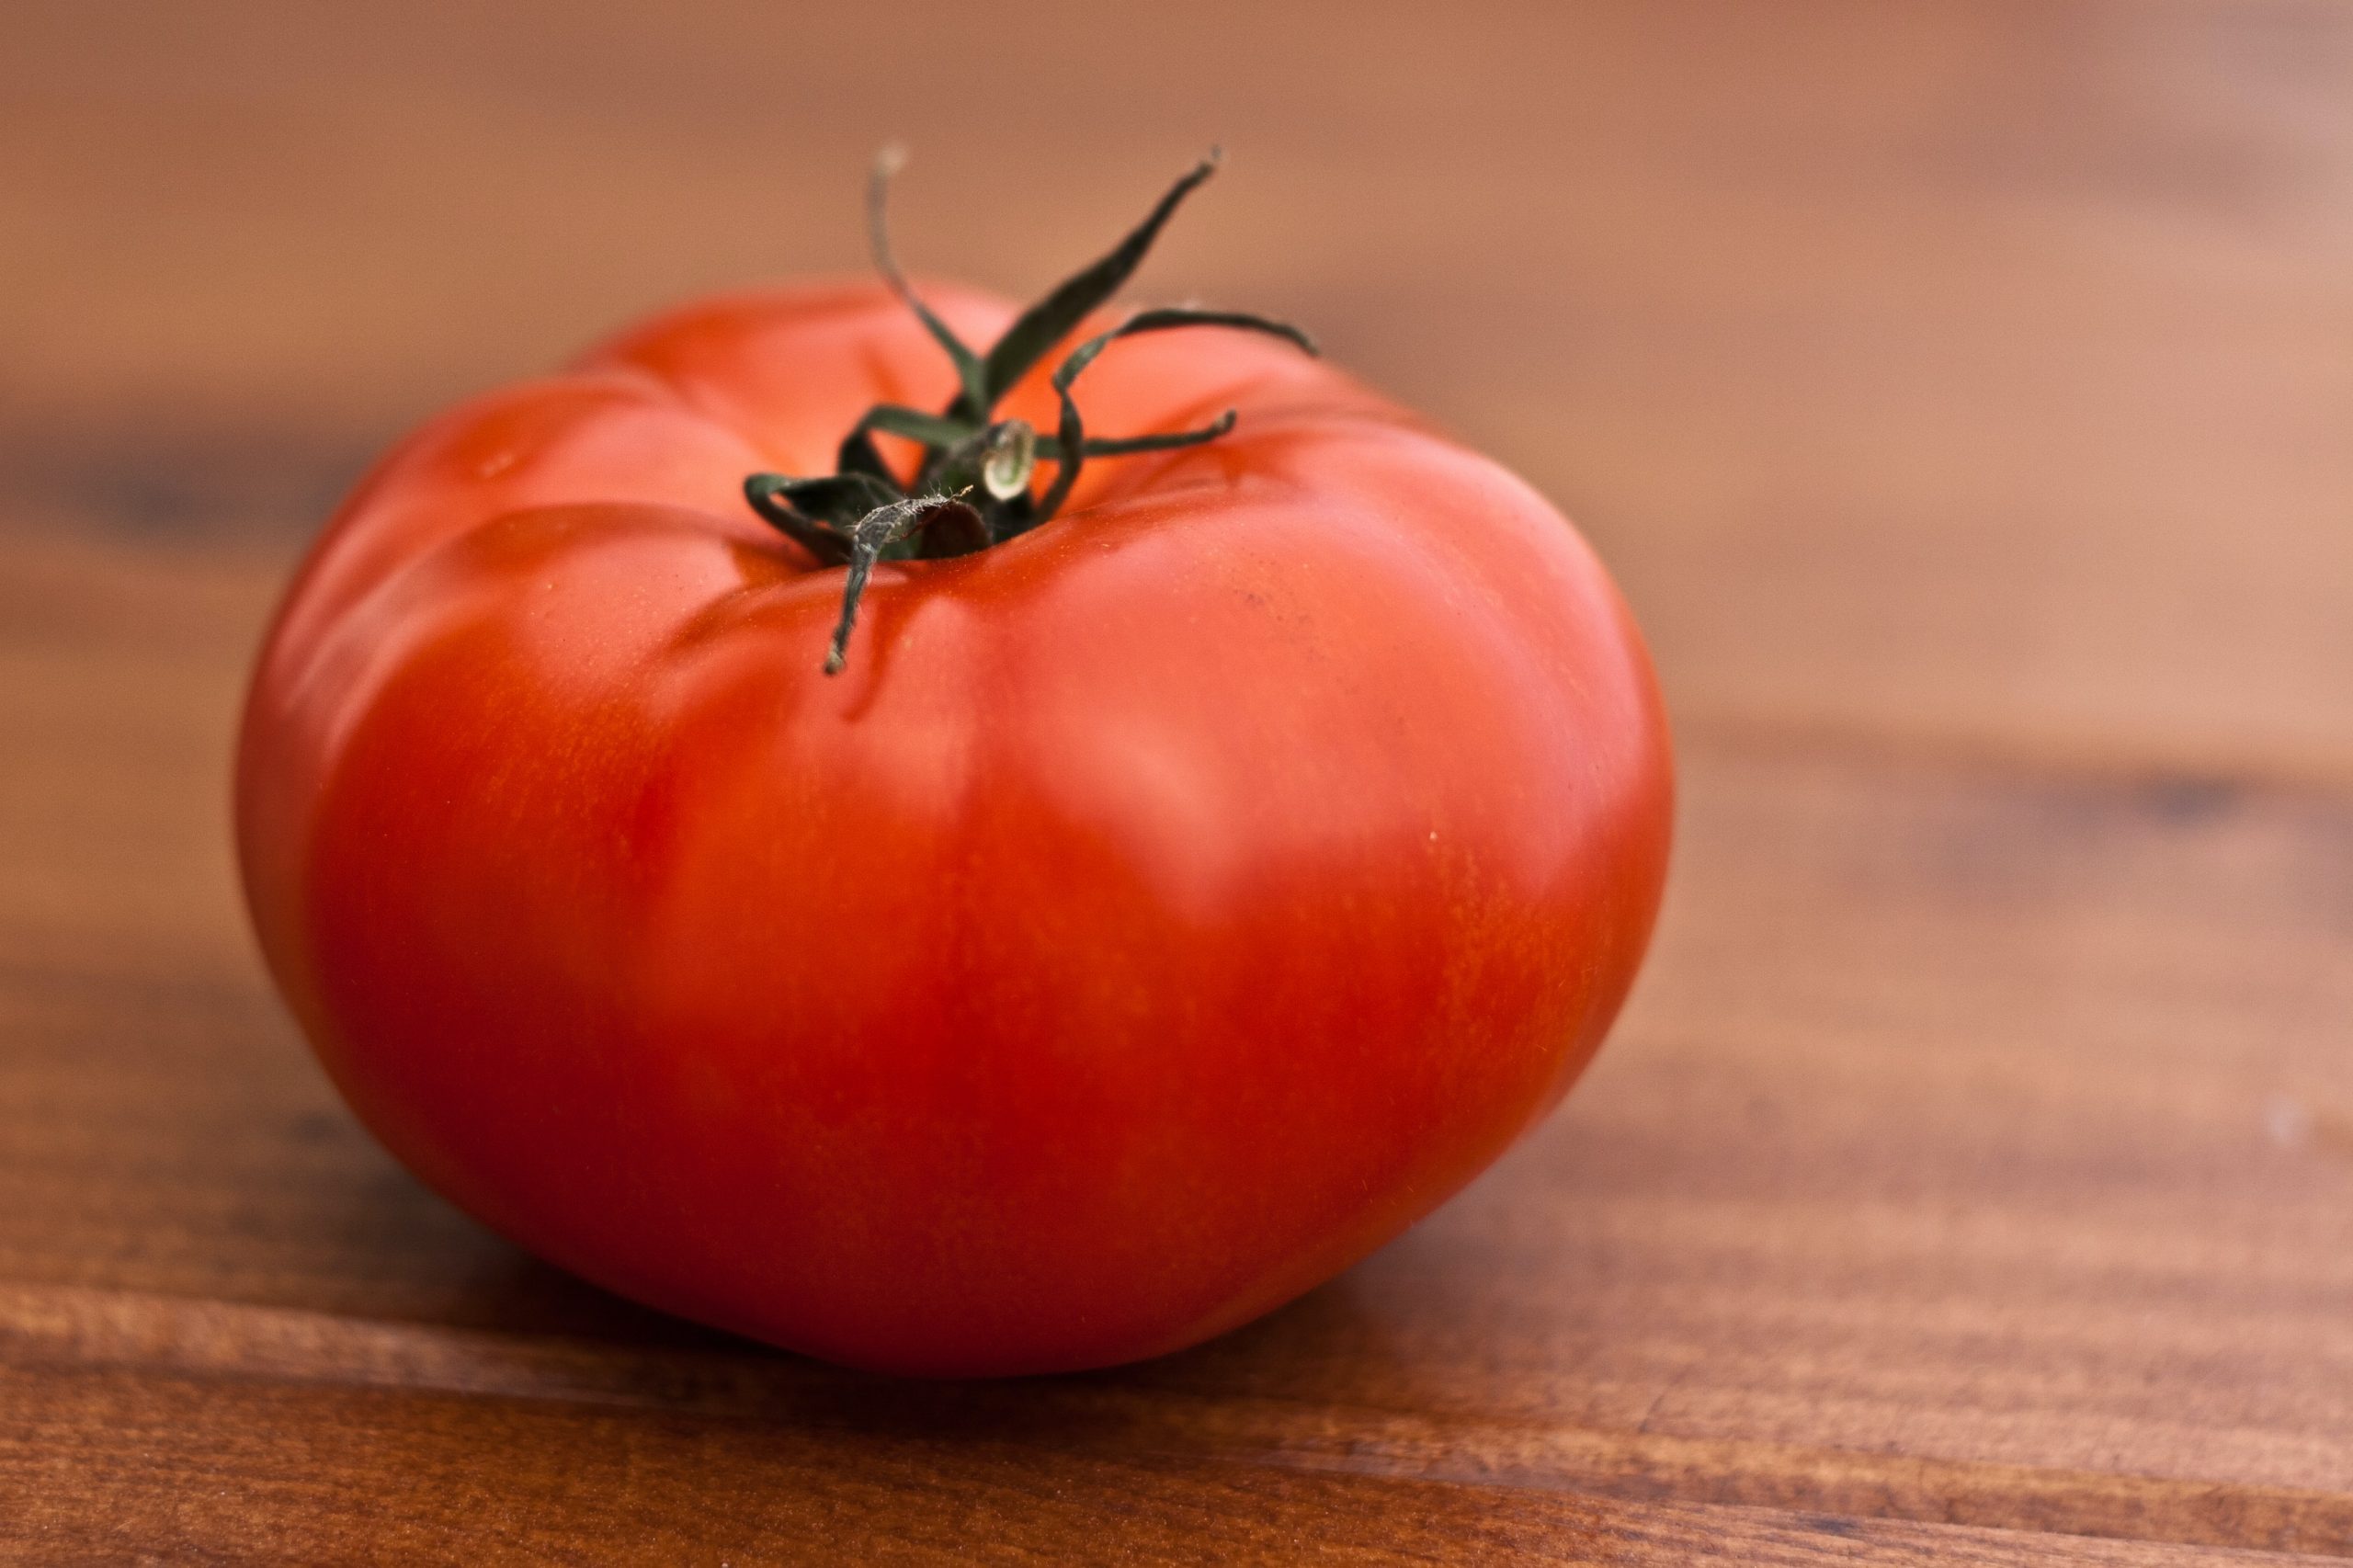 A tomato on a dark wooden table